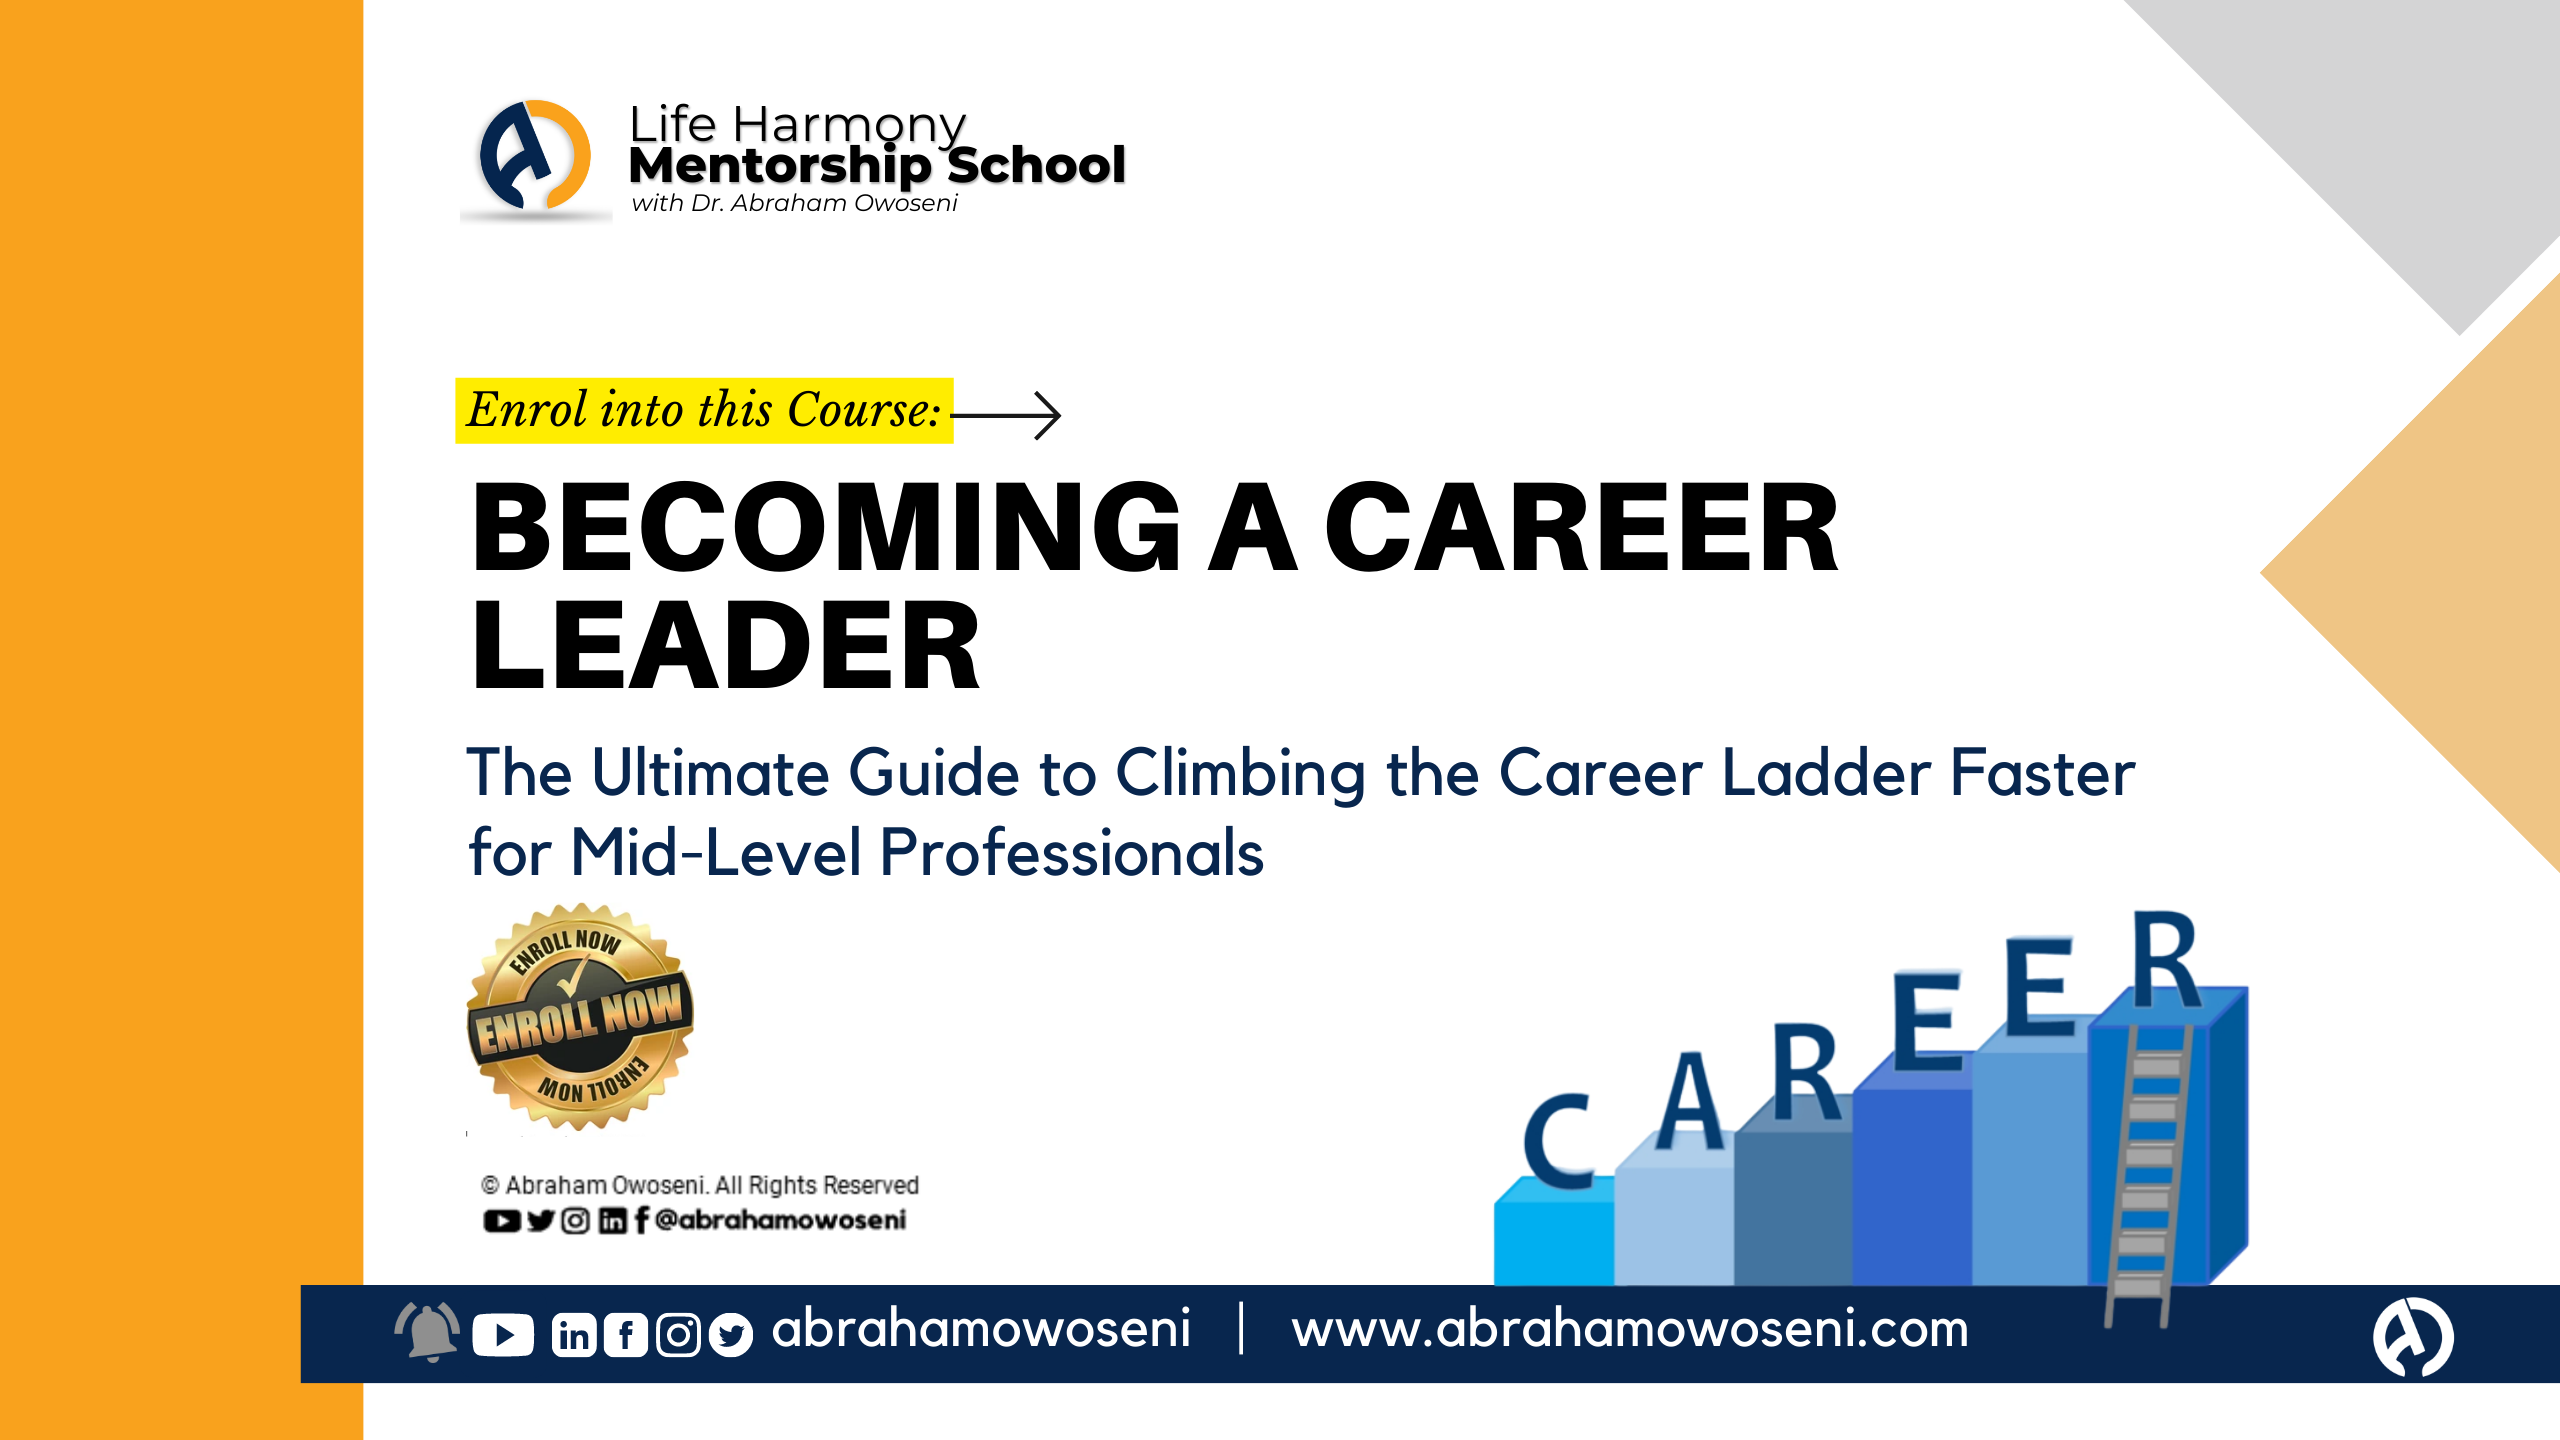 Becoming a Career Leader: The Ultimate Guide to Climbing the Career Ladder Faster